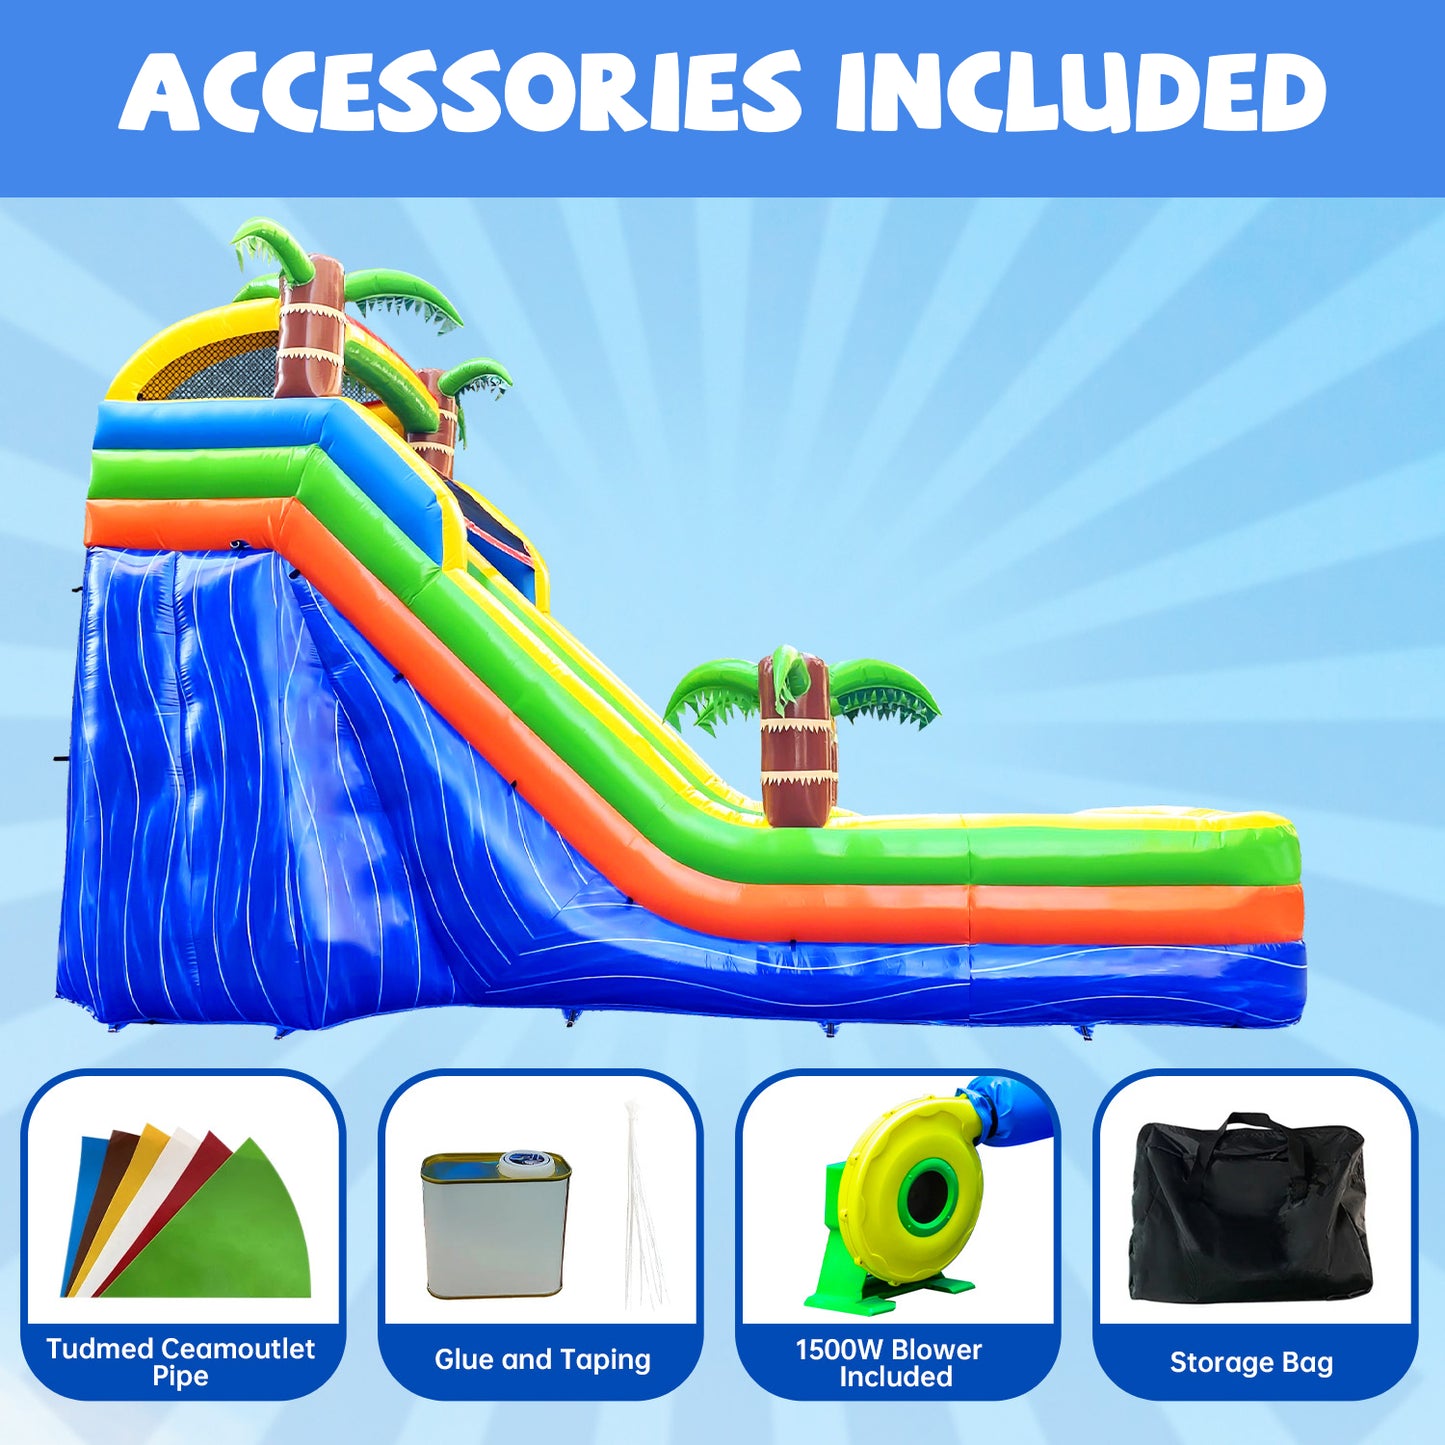 25' x 12' x 16' Wet/Dry Commercial-grade Inflatable Water Slide #11187